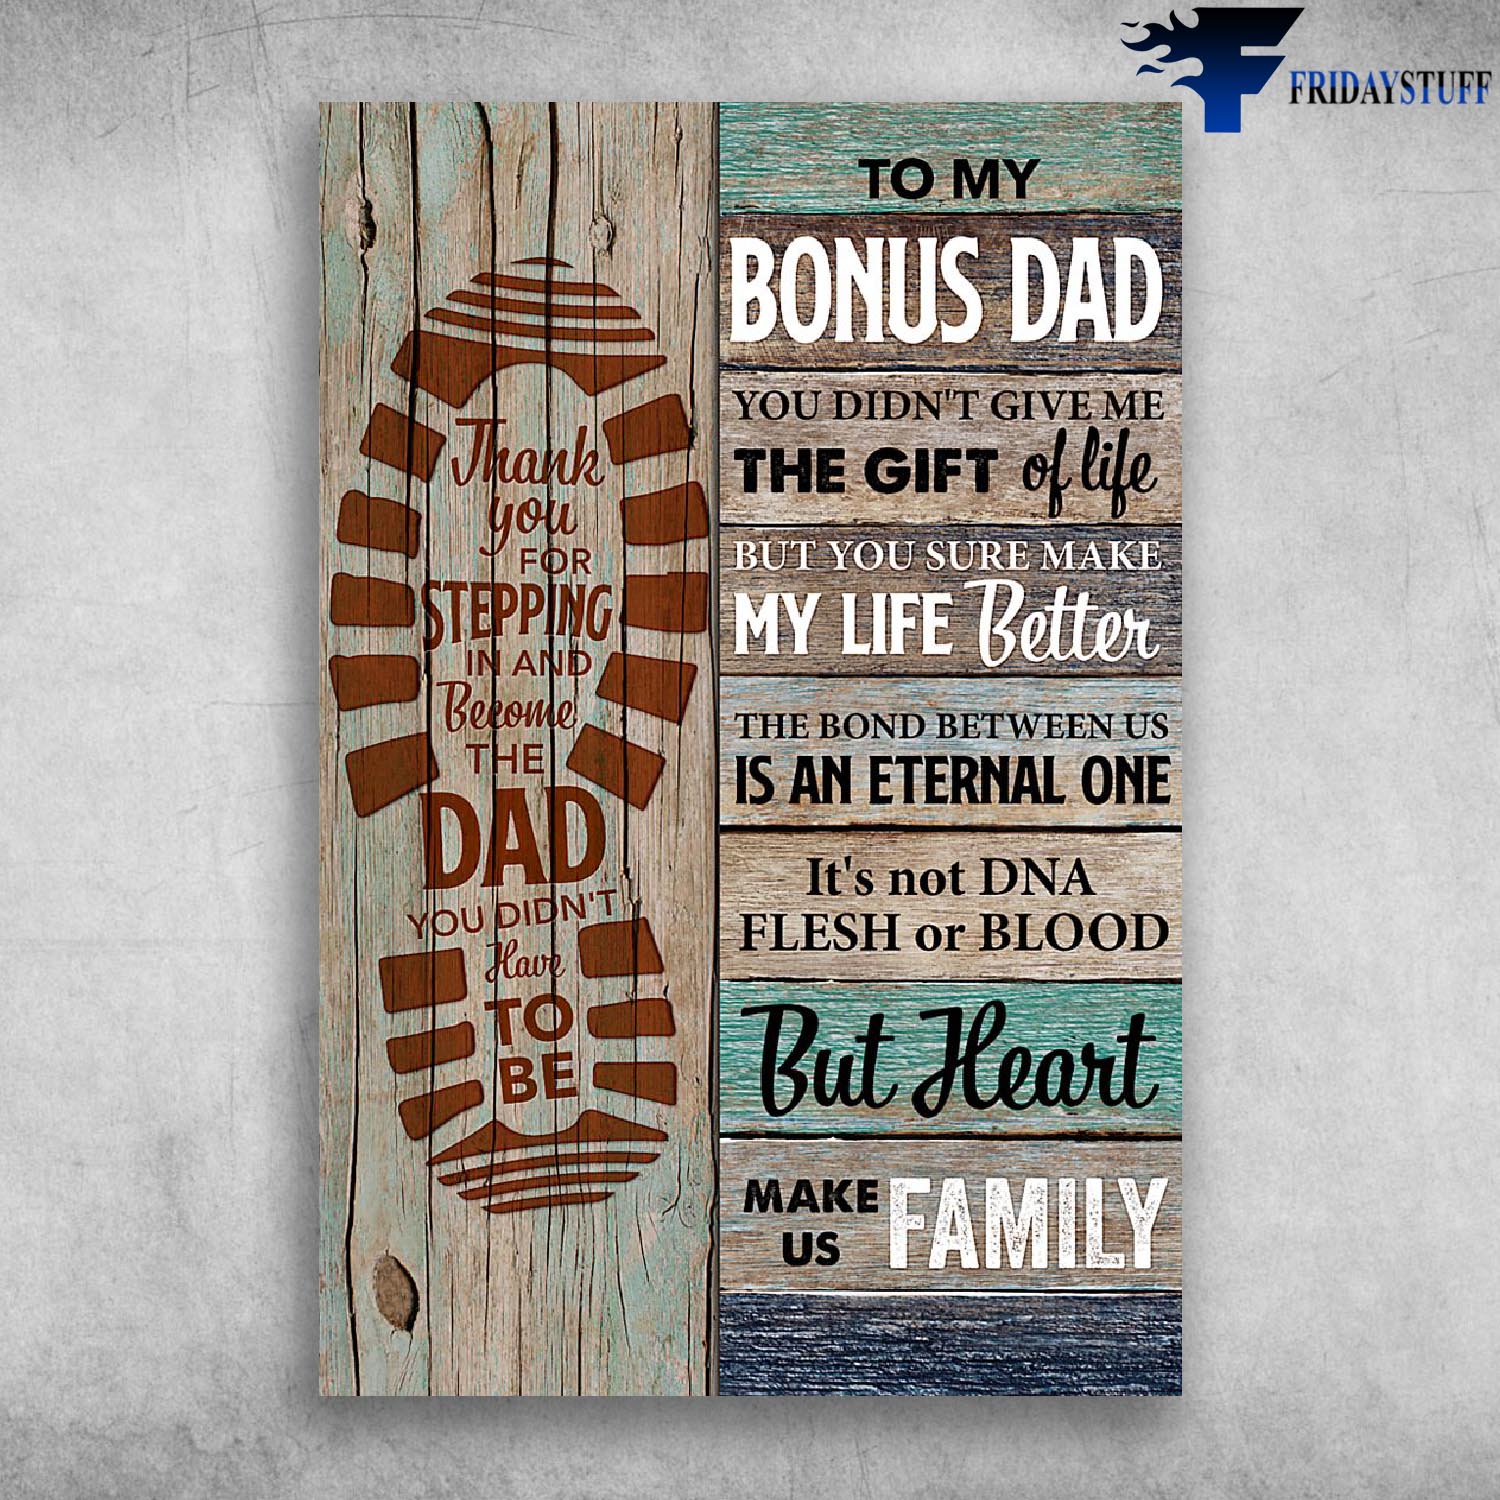 To My Bonus Dad You Didn't Give Me The Gift Of Life - Thank You For Stepping In And Become The Dad